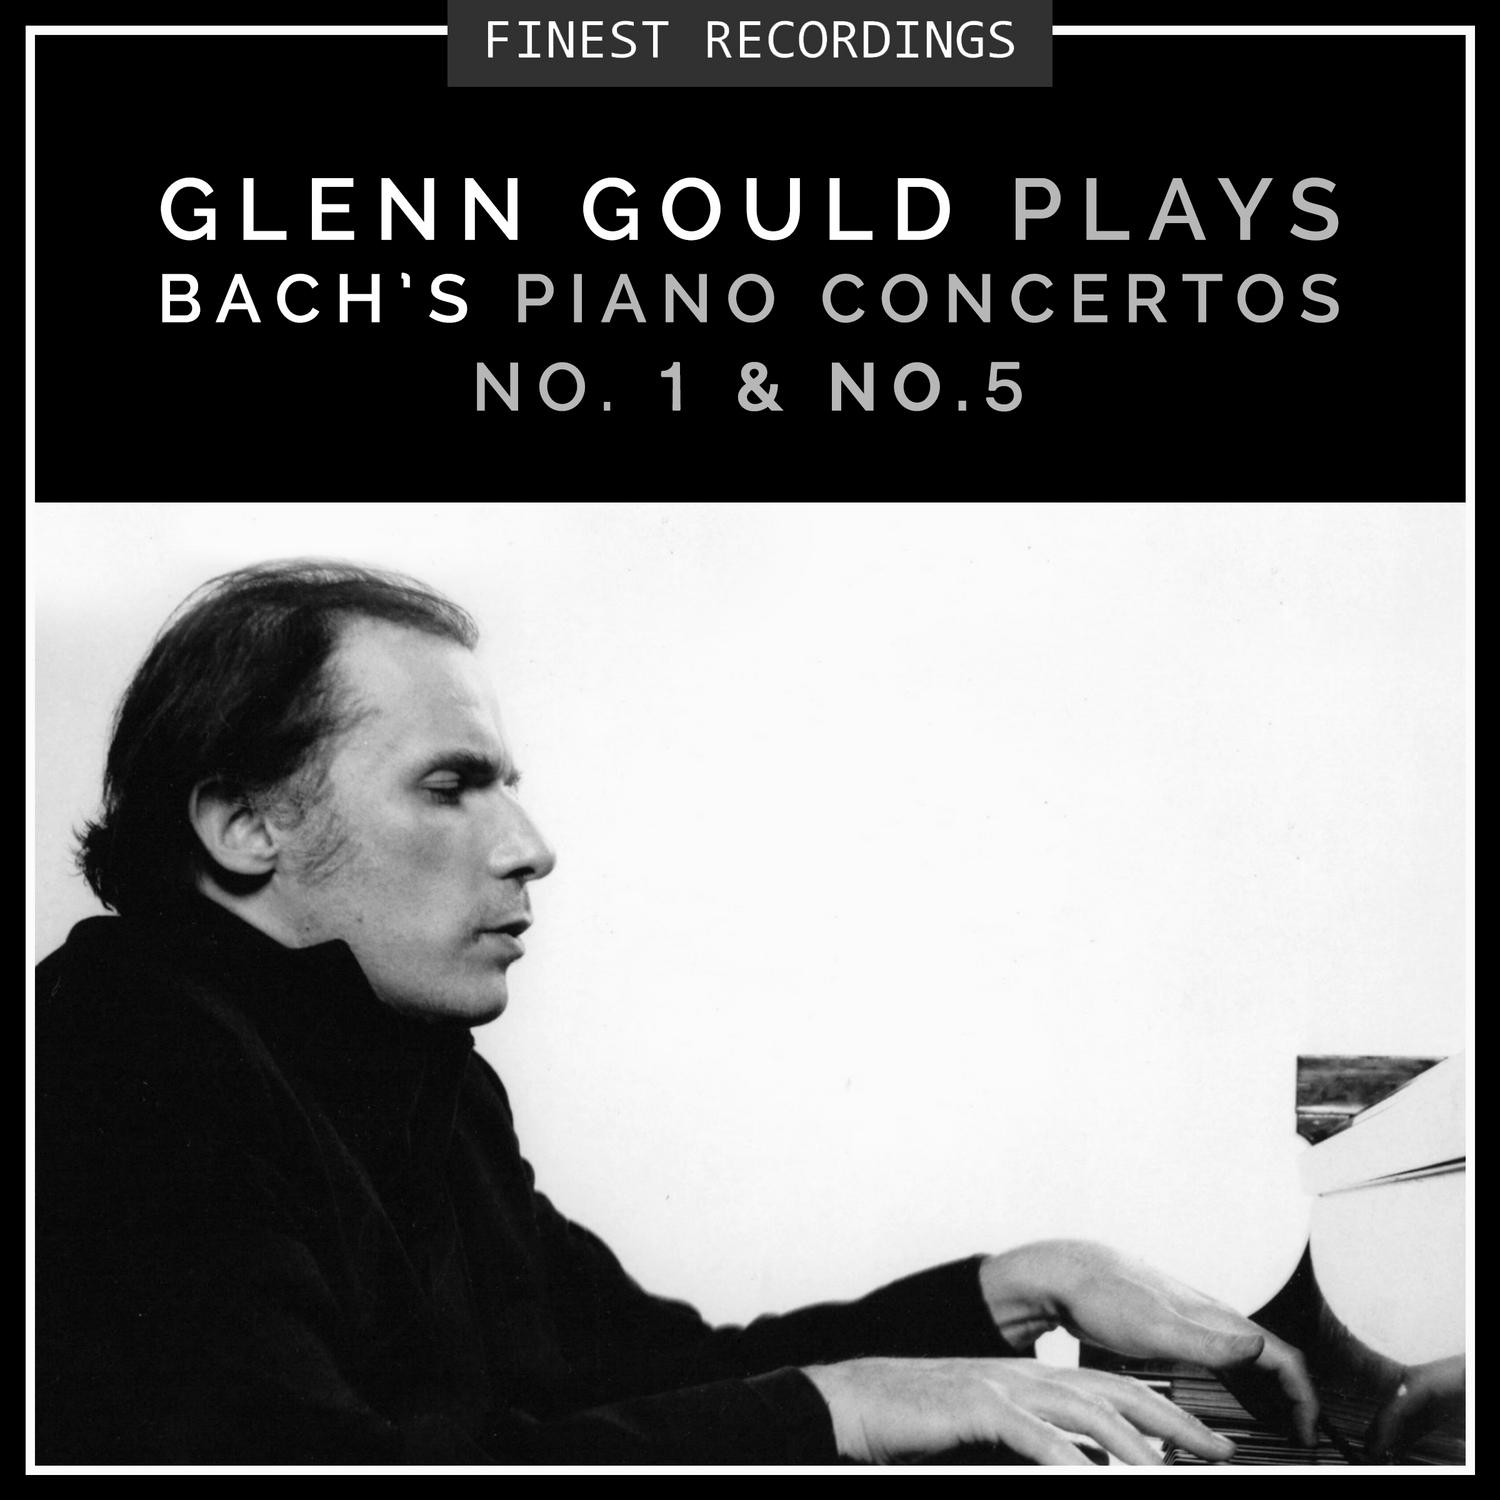 Concerto for Keyboard and Orchestra No. 1 in D Minor, BWV 1052: III. Allegro